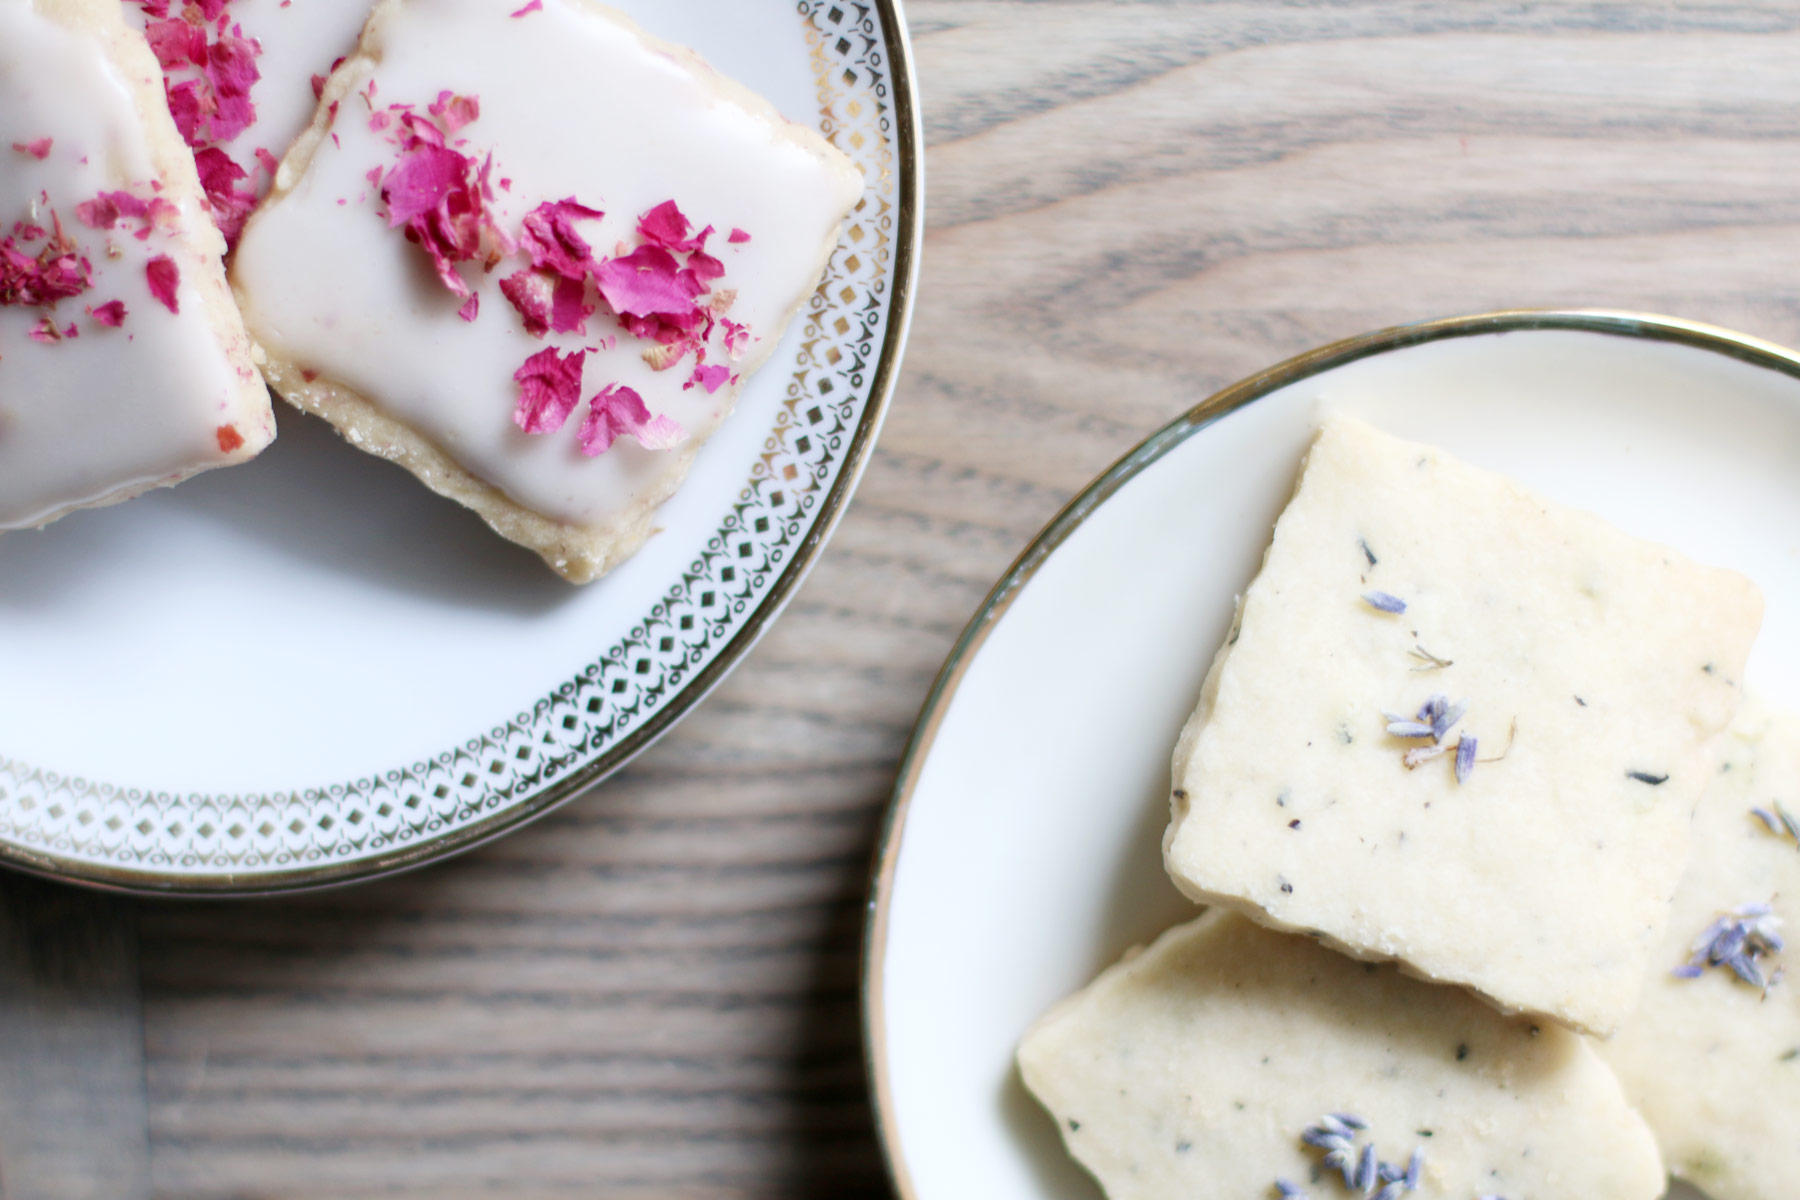 Shortbread Recipes with variations that are a must try